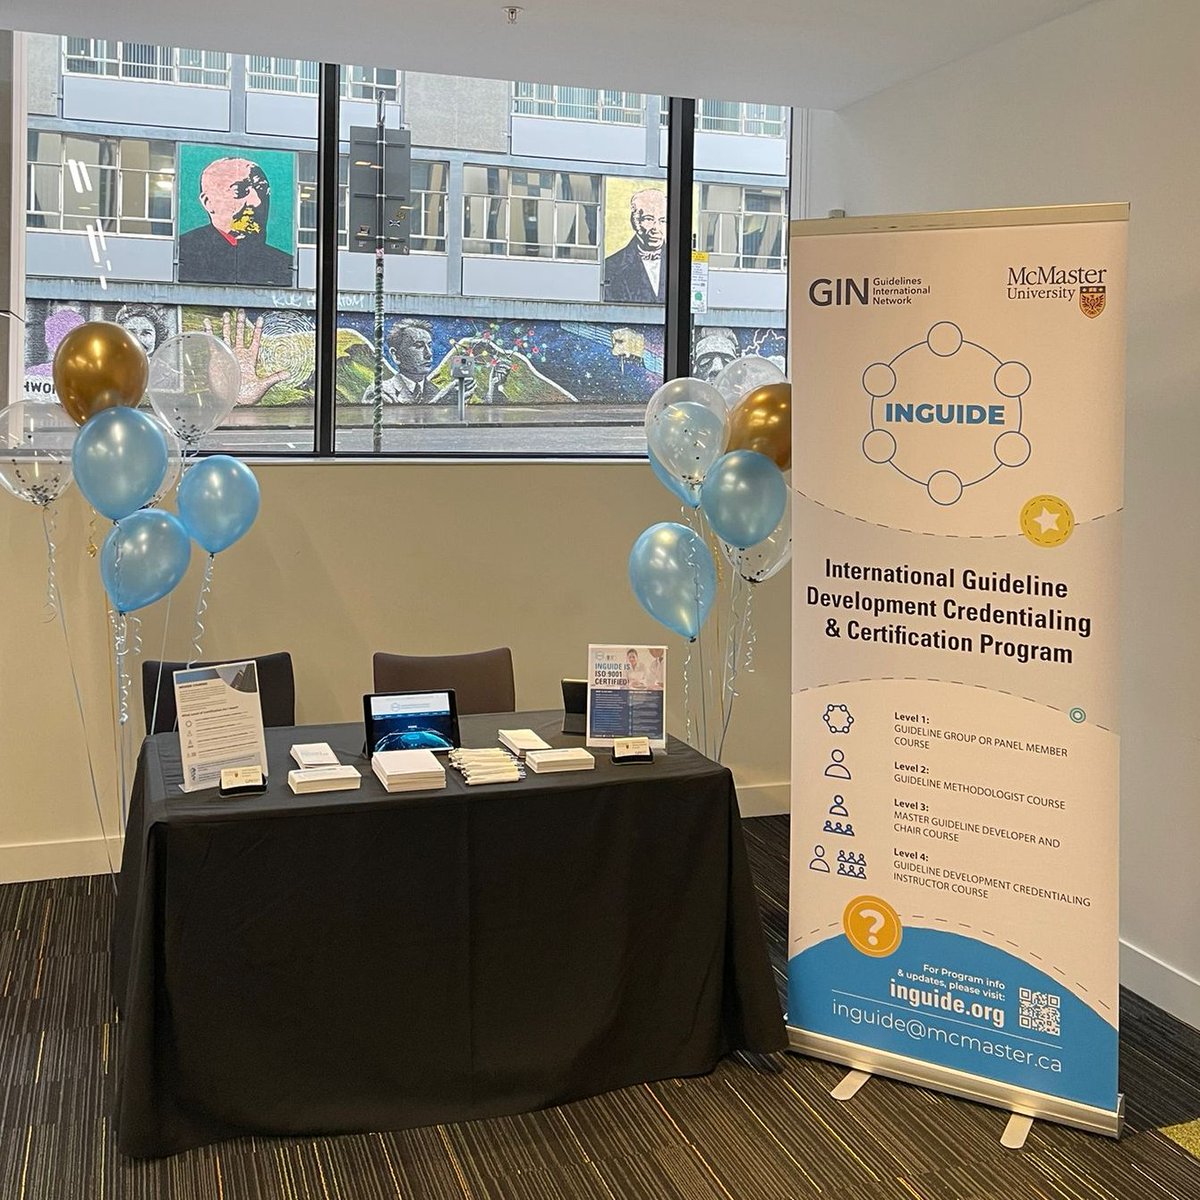 Come visit us at the INGUIDE stand in the exhibitor hall to learn more about the INGUIDE course offerings. We are very excited to see you all soon! 📍Strathclyde University, The Technology & Innovation Centre #GIN2023Glasgow